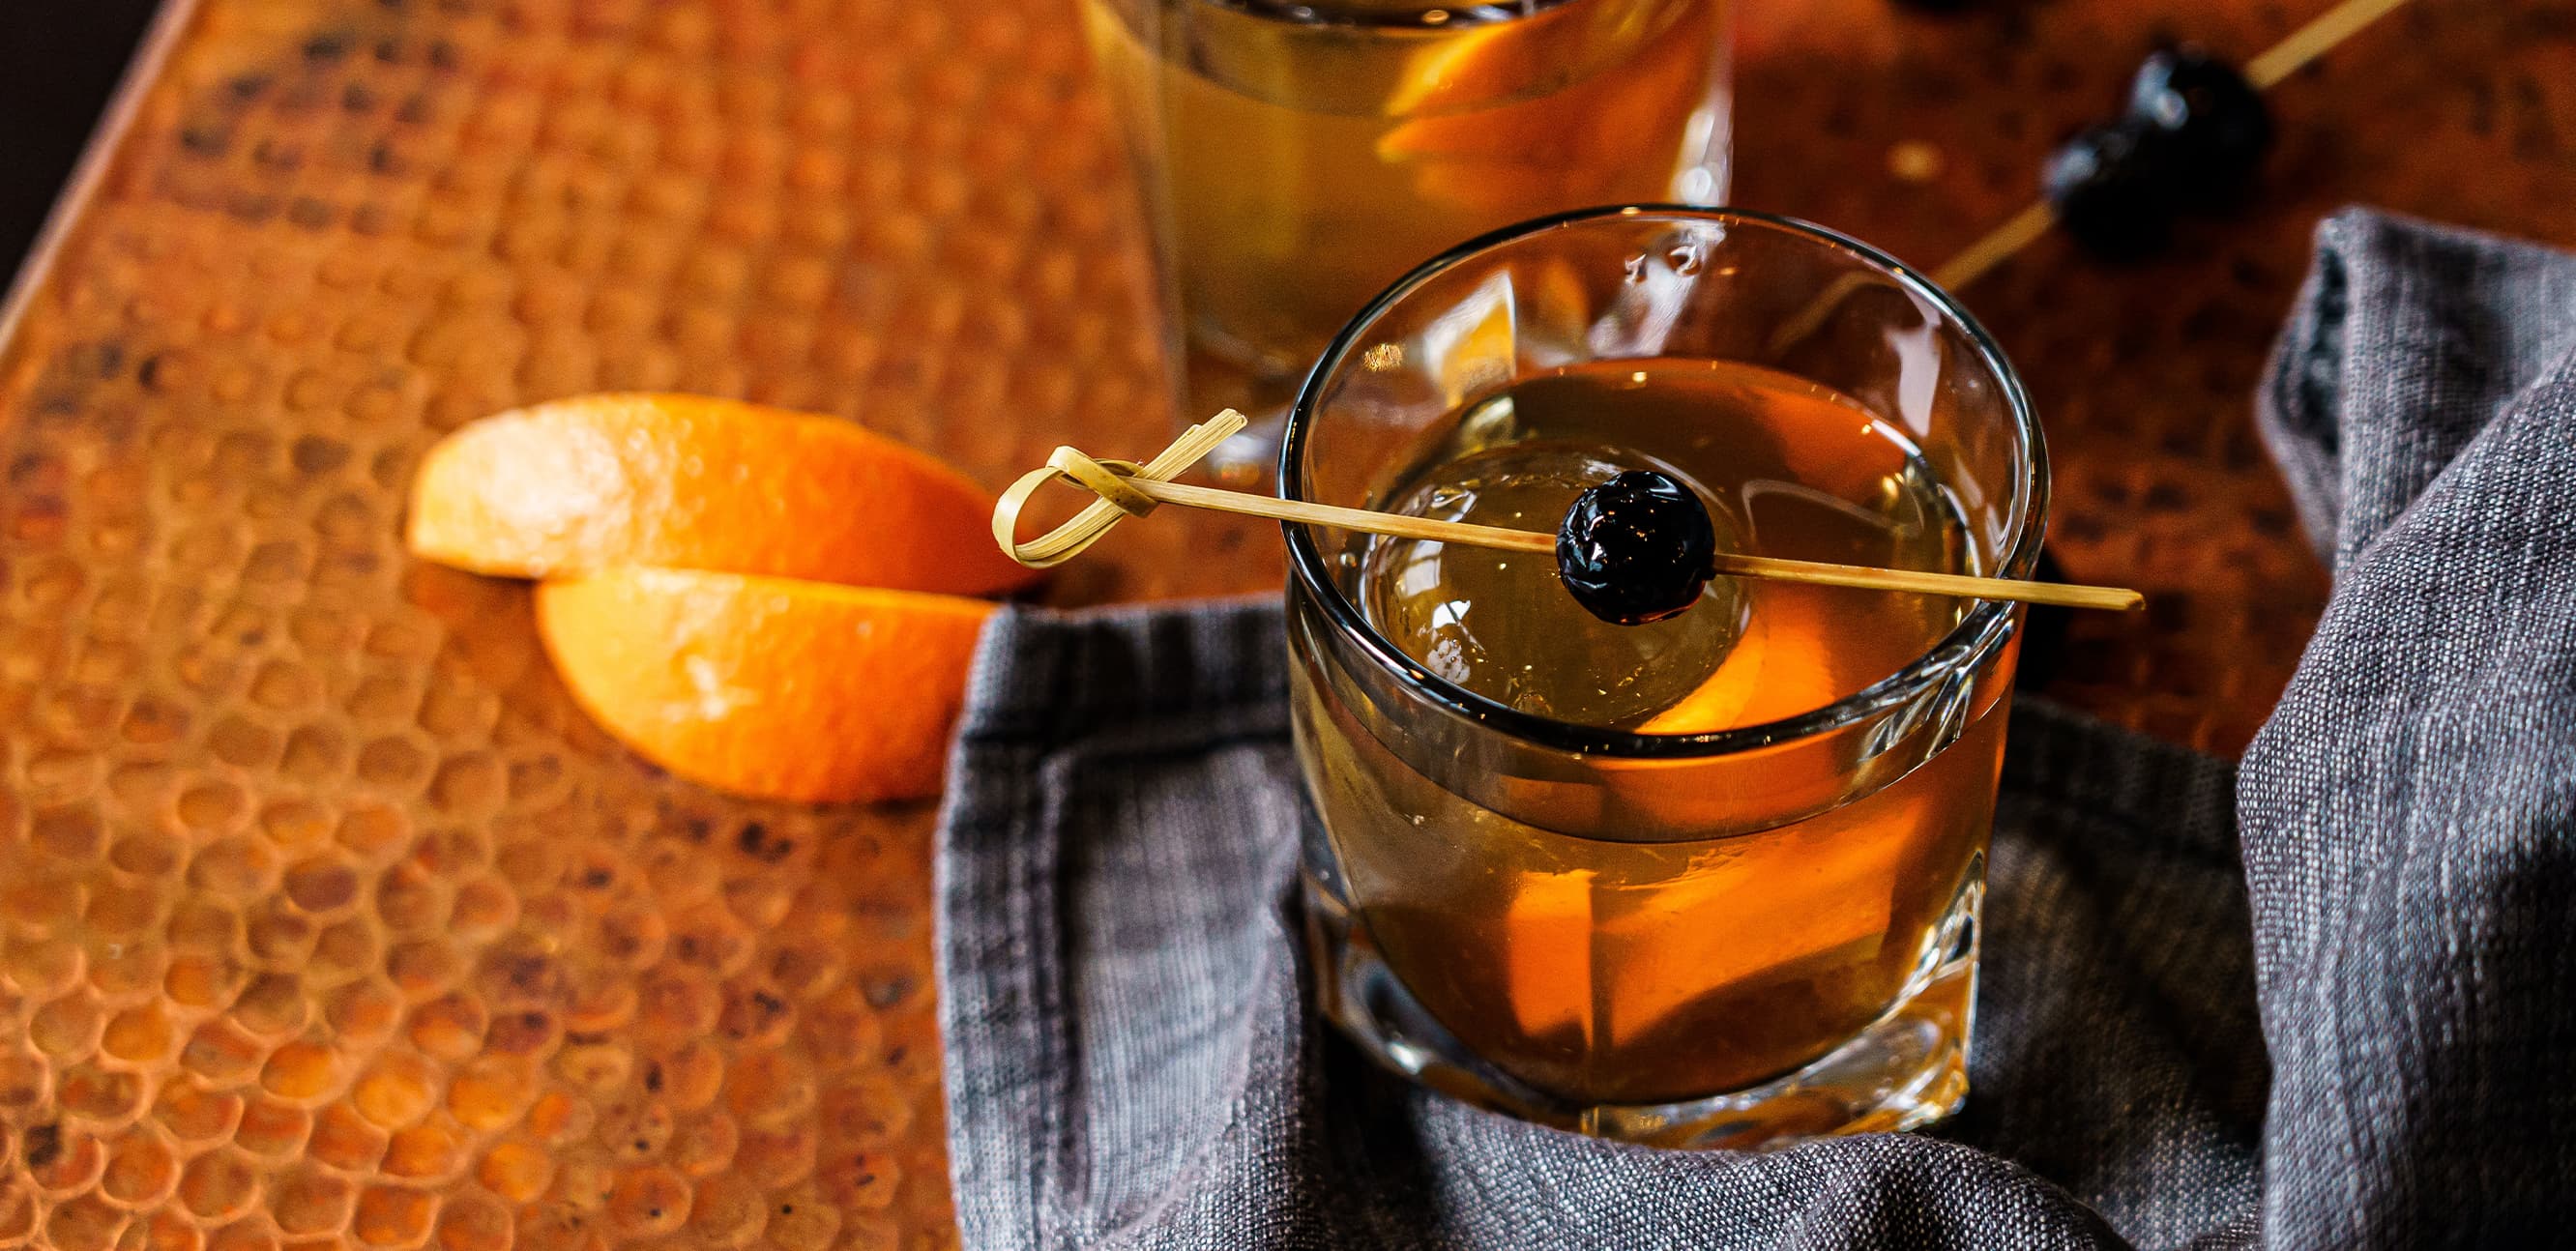 How to Make An Old Fashioned: Home Bartending 101